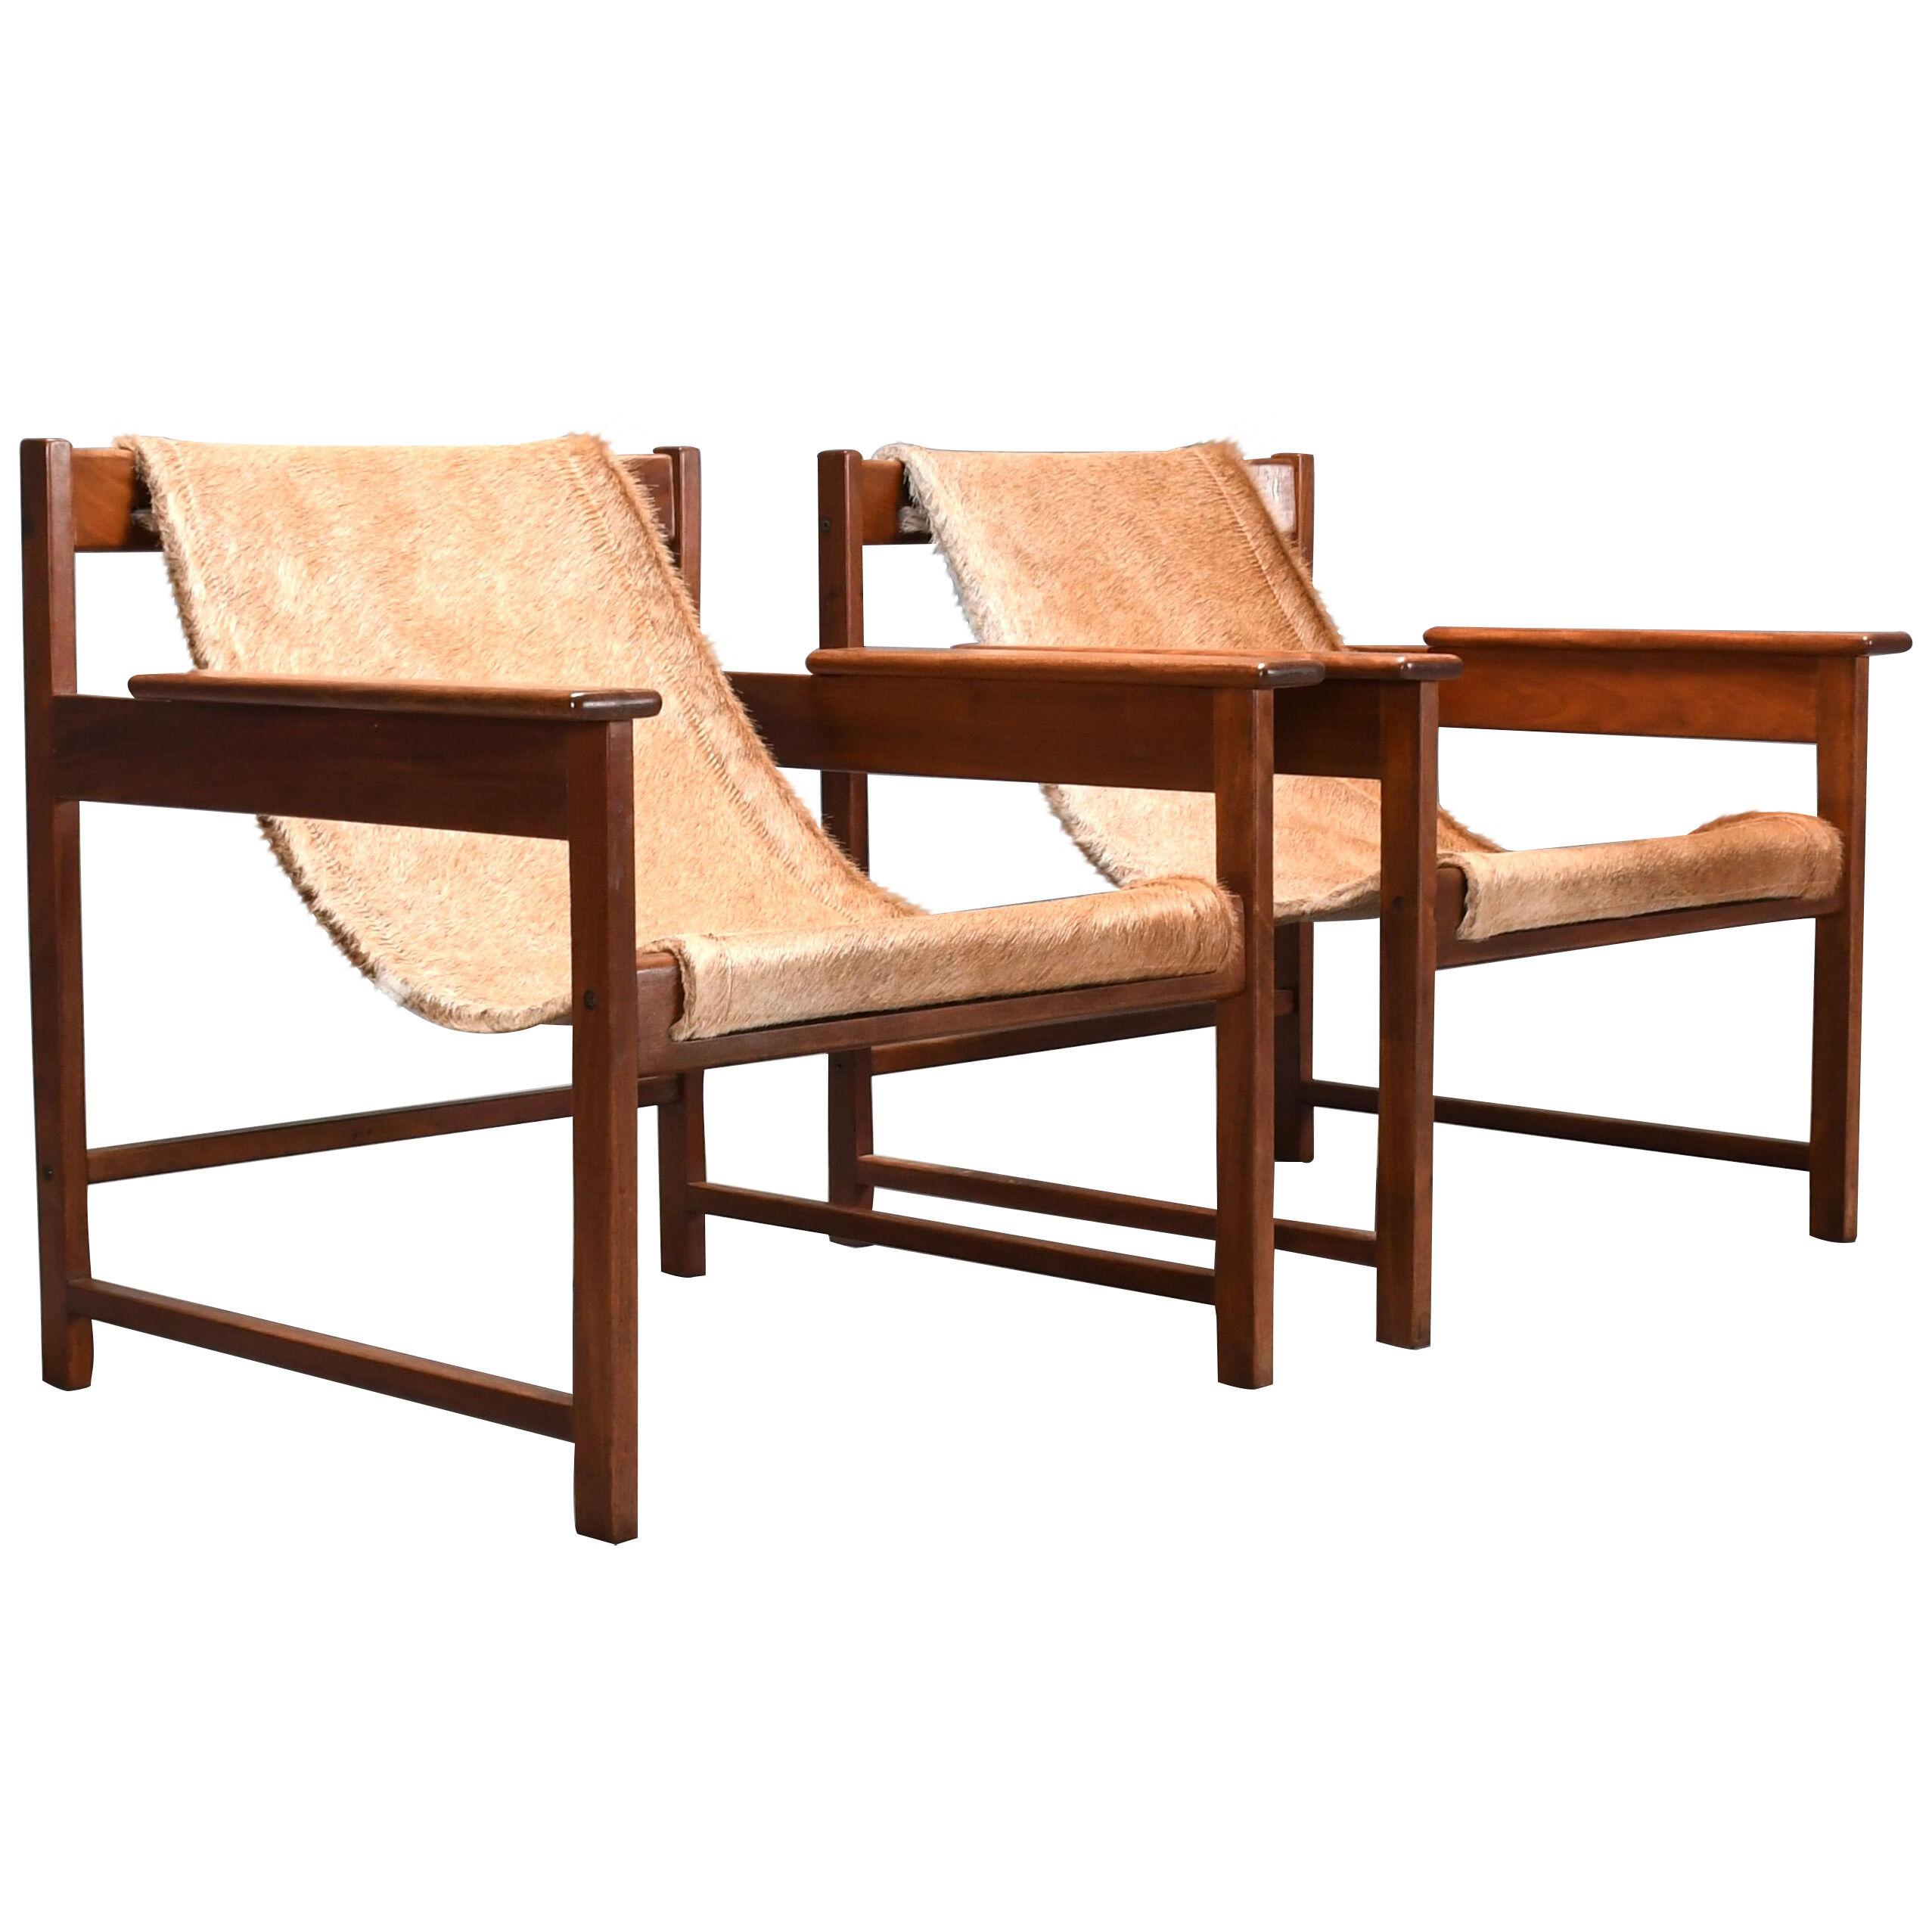 Pair of ‘Lia’ Armchairs by Sérgio Rodrigues, Brazil, 1962, Jacaranda and Cowhide